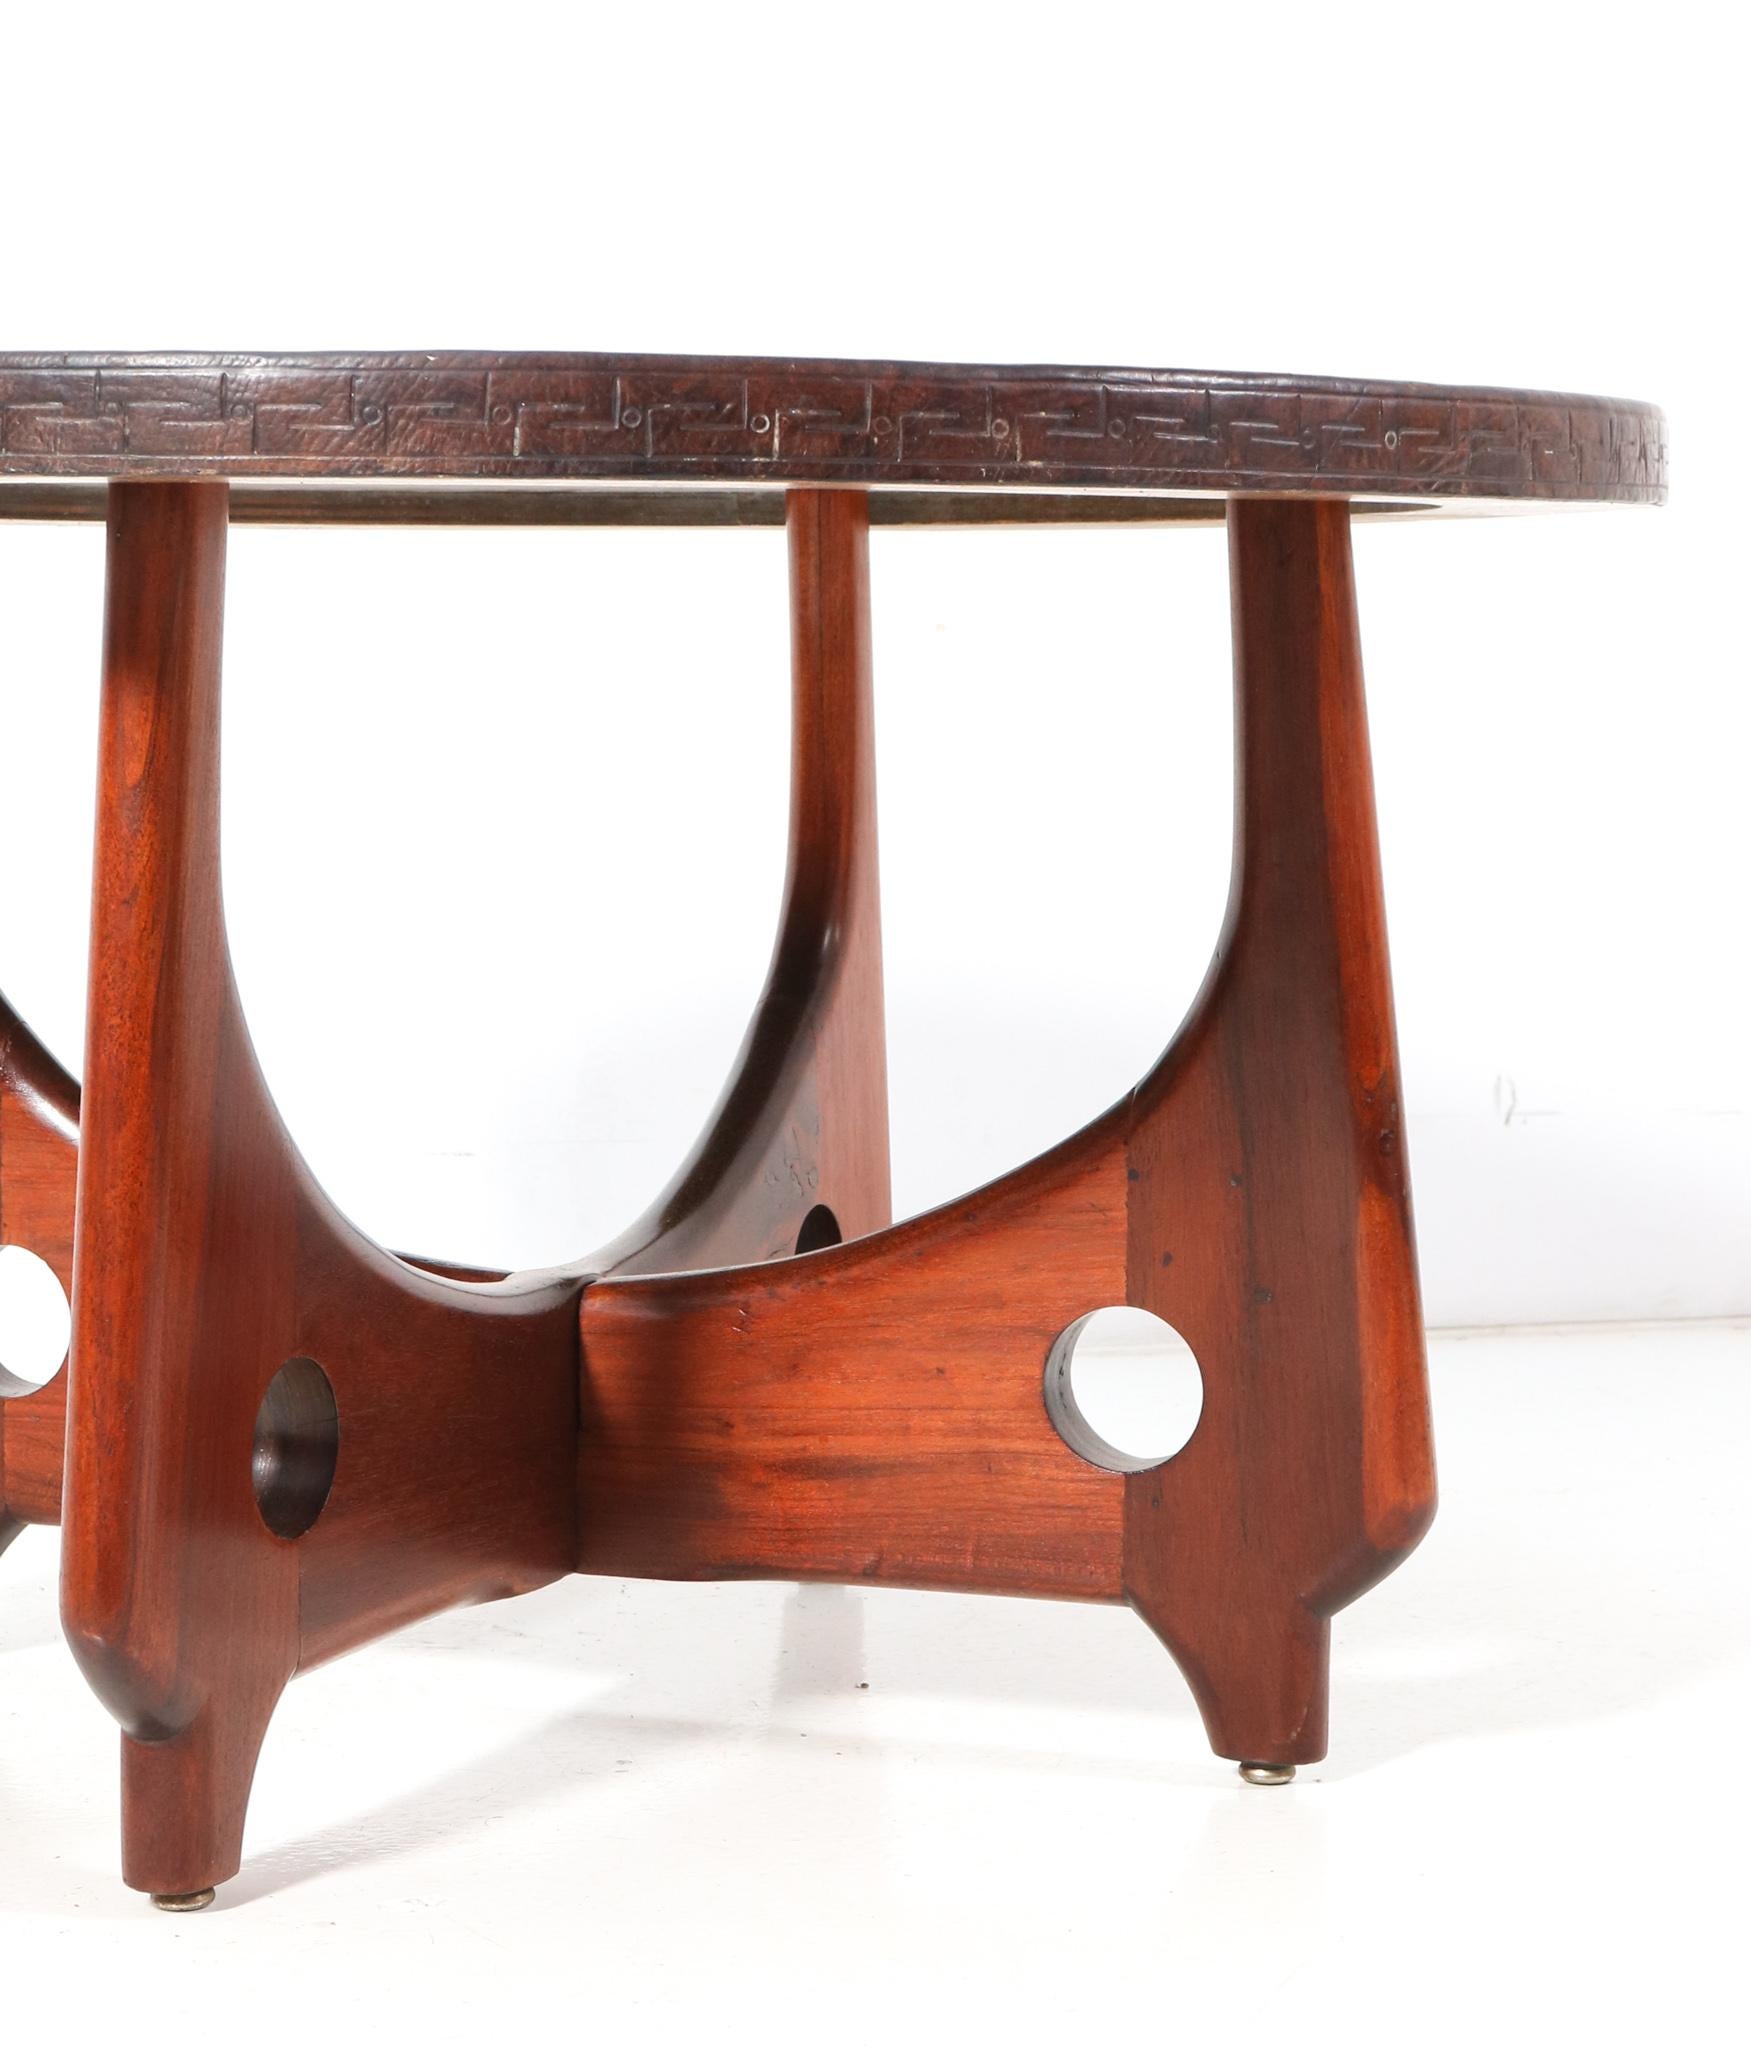 history of coffee tables